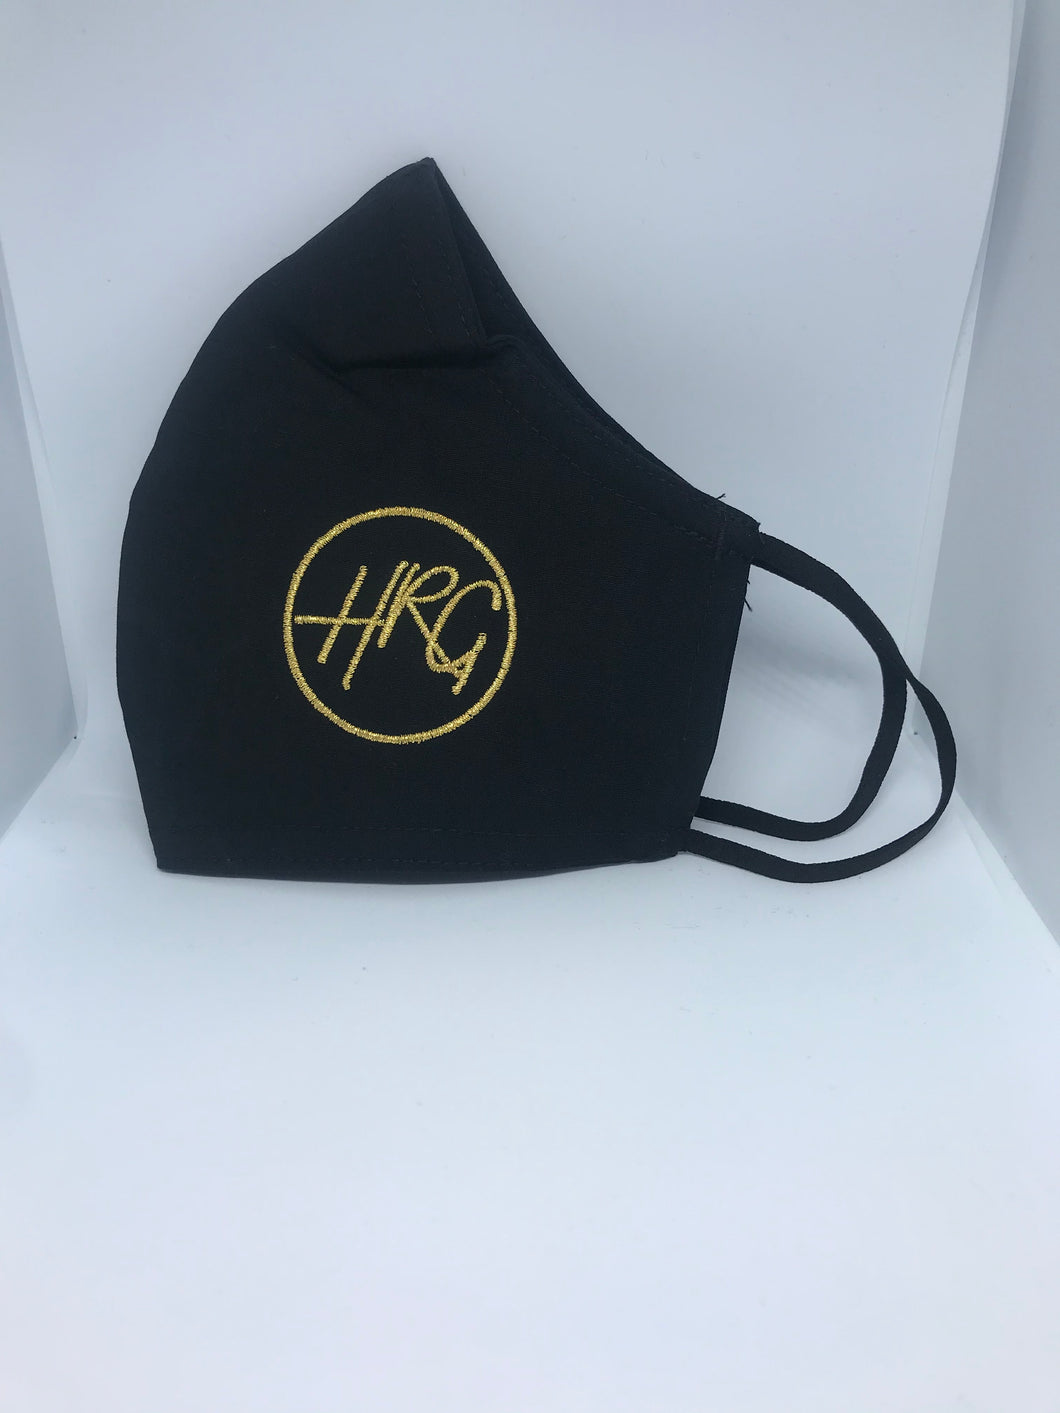 HRG Adult Face Mask - HRG Collection